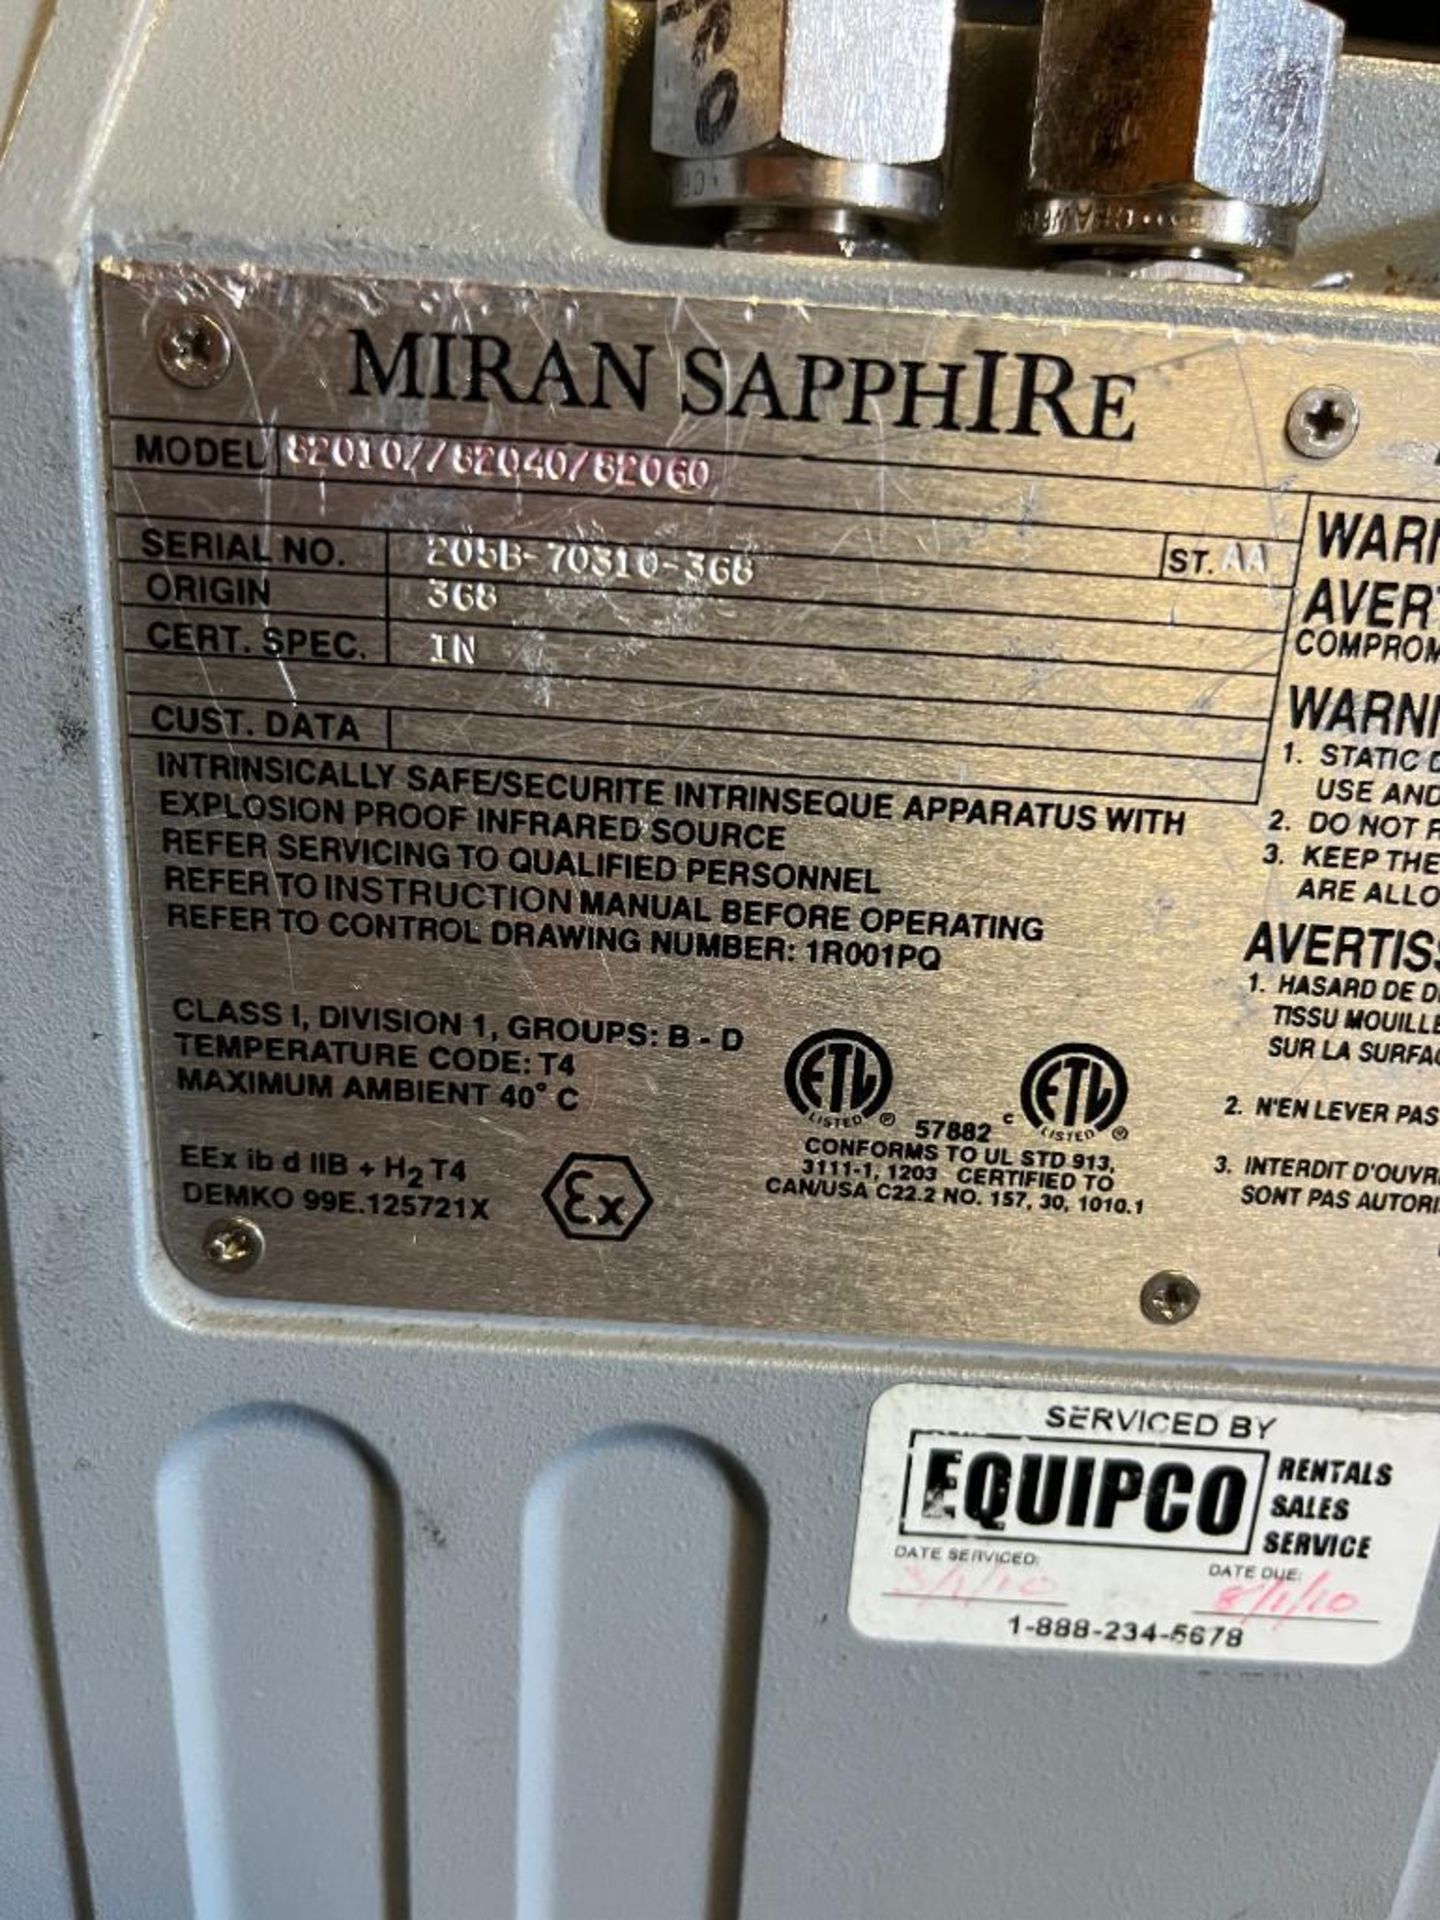 Thermo Scientific Miran Sapphire Ambient Air Analyzer, Model 82010//82040/32060, S/N 205B-70310-368 - Image 6 of 6